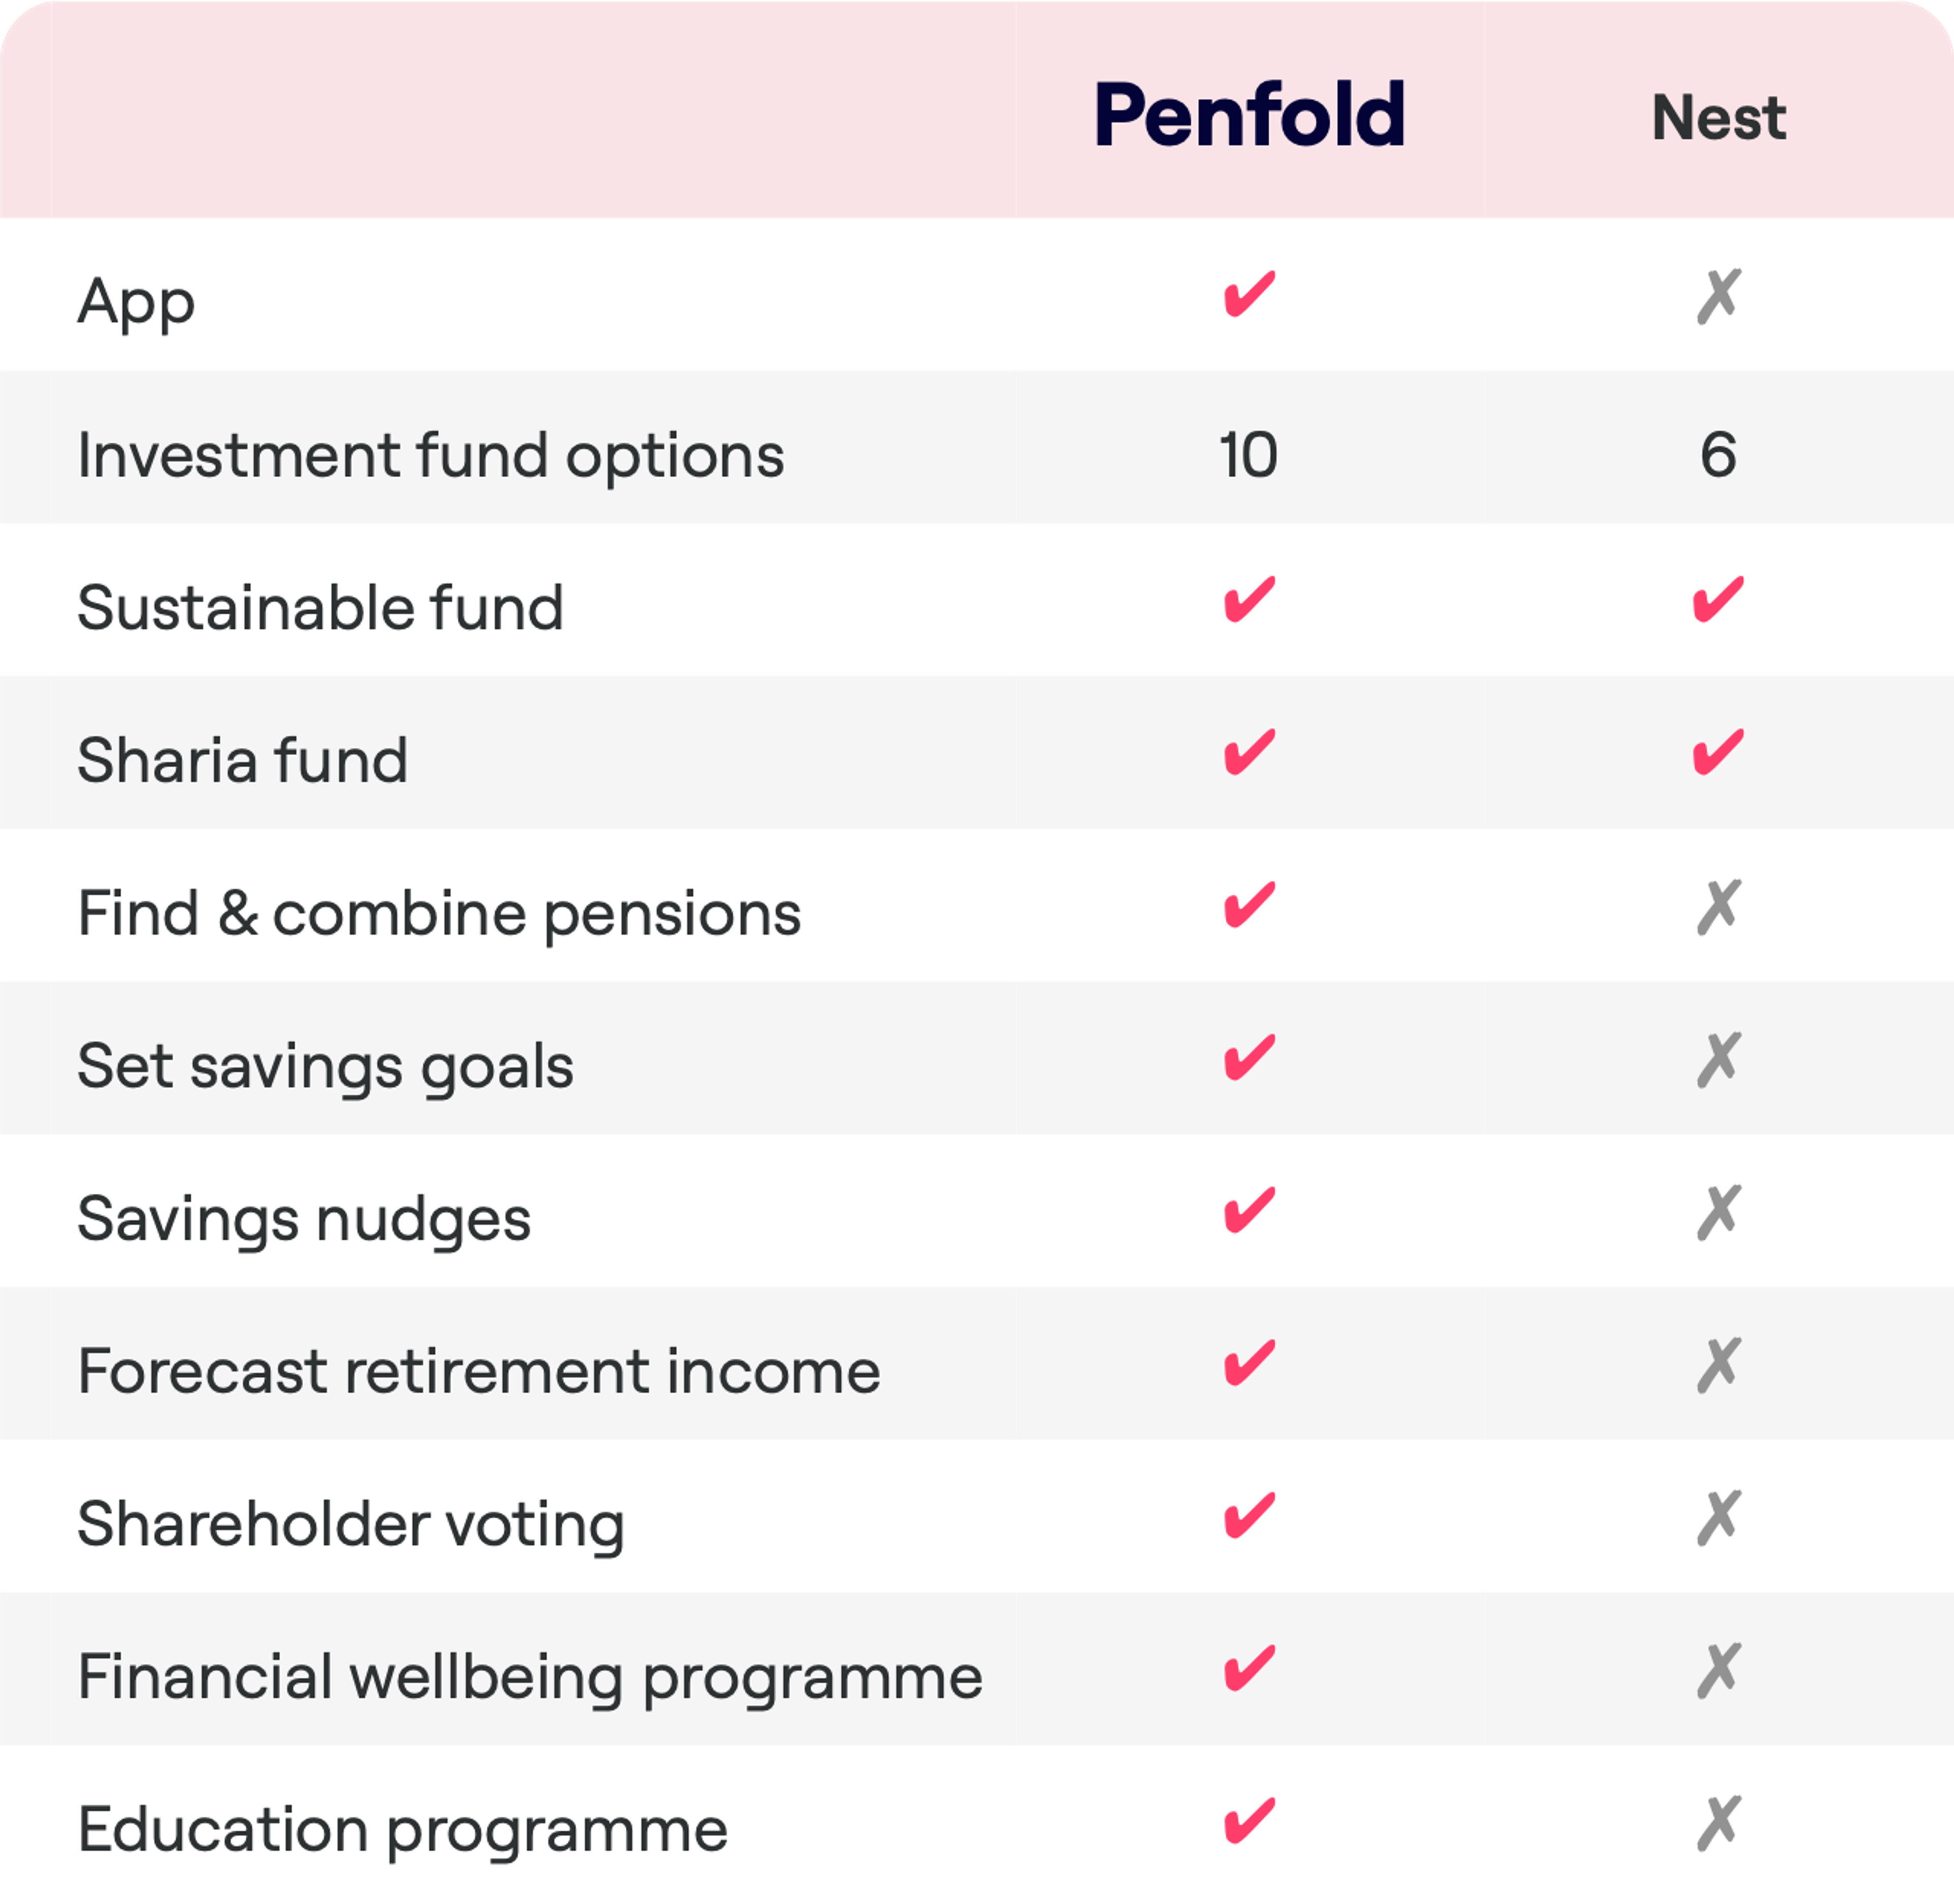 A feature comparison chart for Penfold and Nest pension services. Penfold offers an app, 10 investment fund options, sustainable and Sharia funds, pension finding and combining, savings goals setting, savings nudges, retirement income forecasting, shareholder voting, a financial wellbeing programme, and an education programme. Nest does not offer an app, has 6 investment fund options, but does provide sustainable and Sharia funds. It does not support finding and combining pensions, setting savings goals, savings nudges, retirement income forecasting, shareholder voting, financial wellbeing, or education programmes.